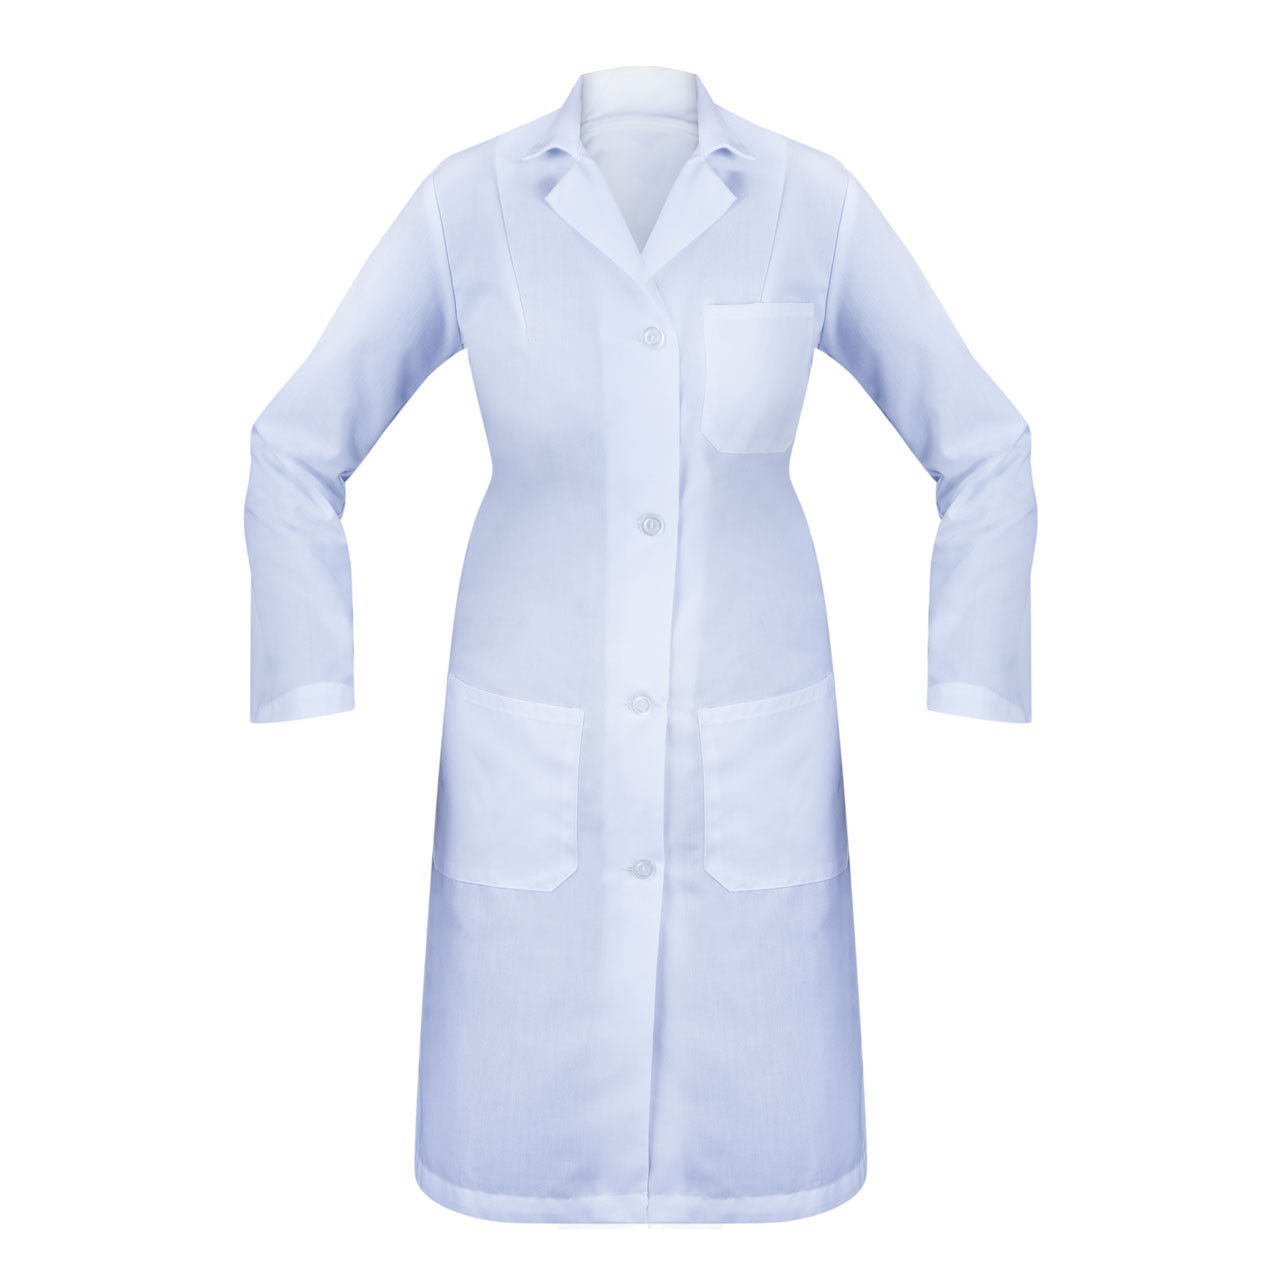 What type of weave does the Female Lab Coat have?